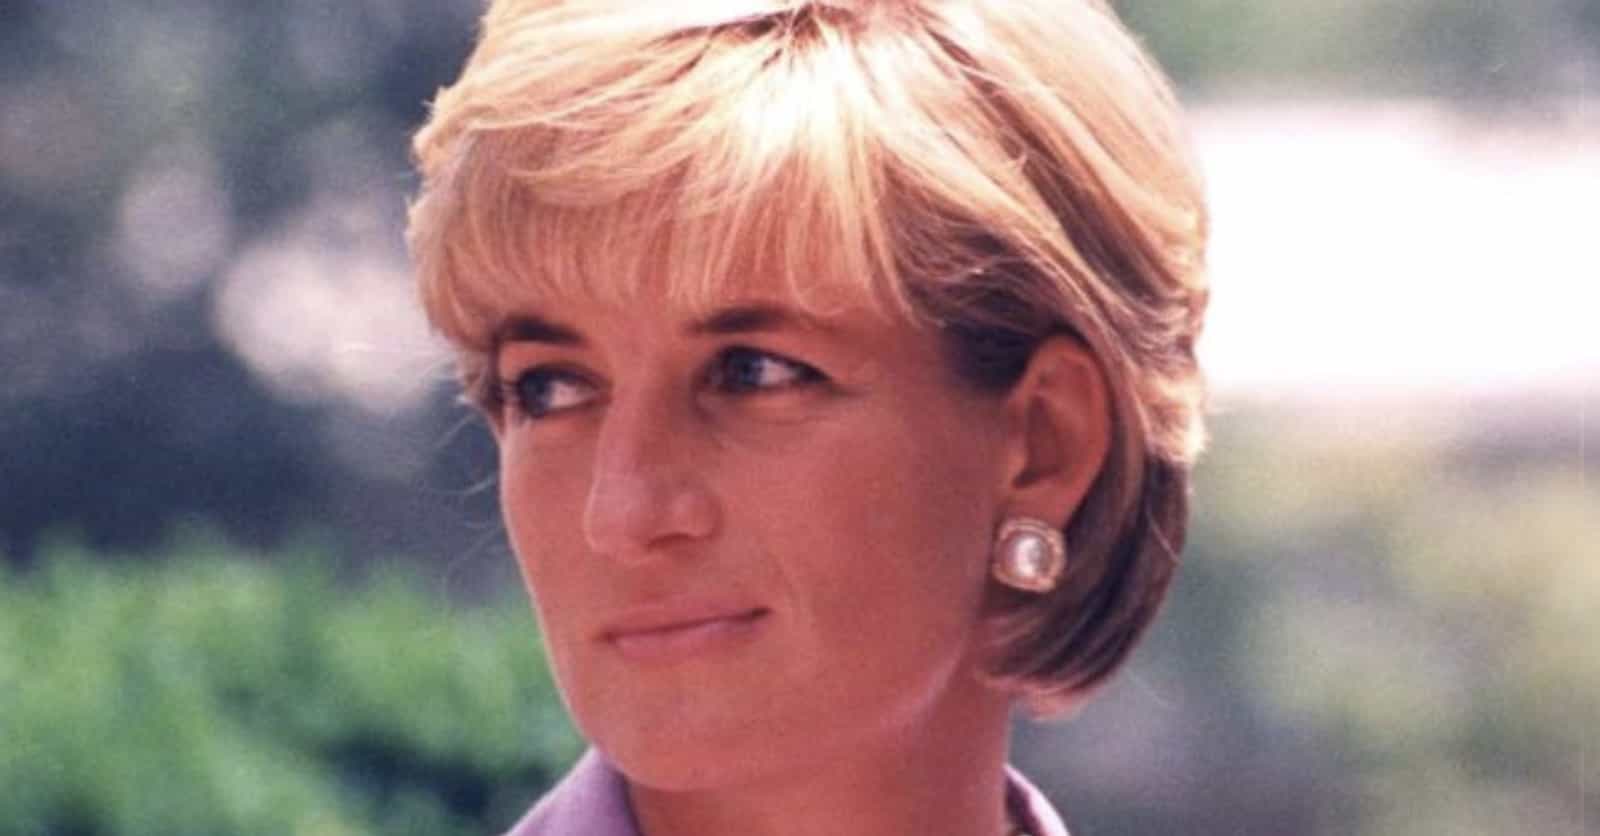 Facts About Princess Diana We Just Learned That Made Us Say 'Really?'